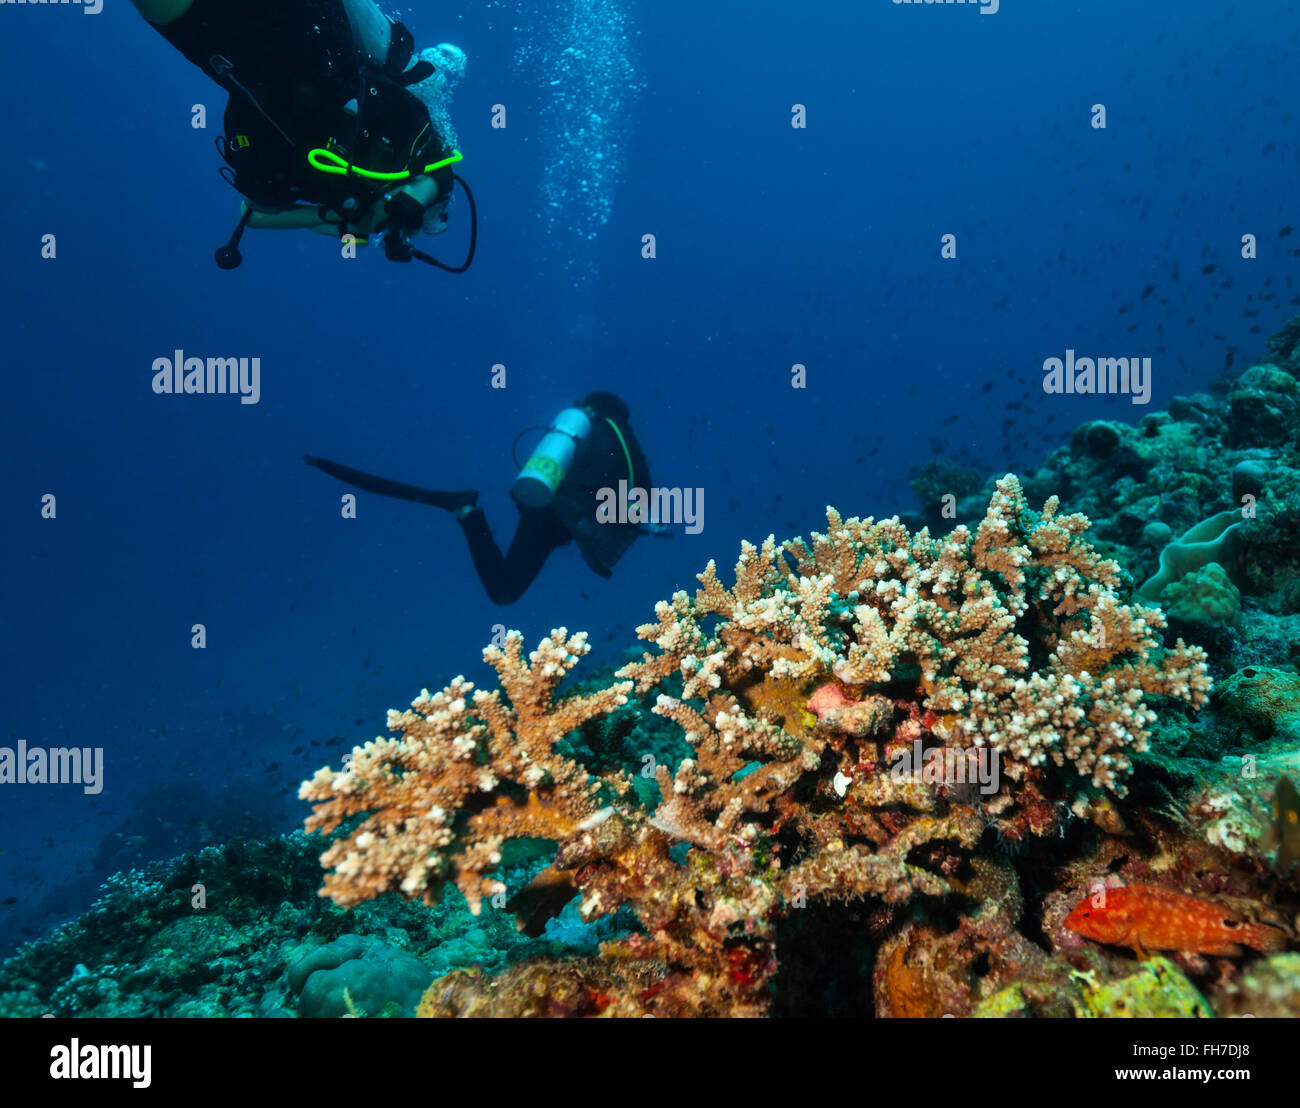 Group of scuba divers underwater Stock Photo